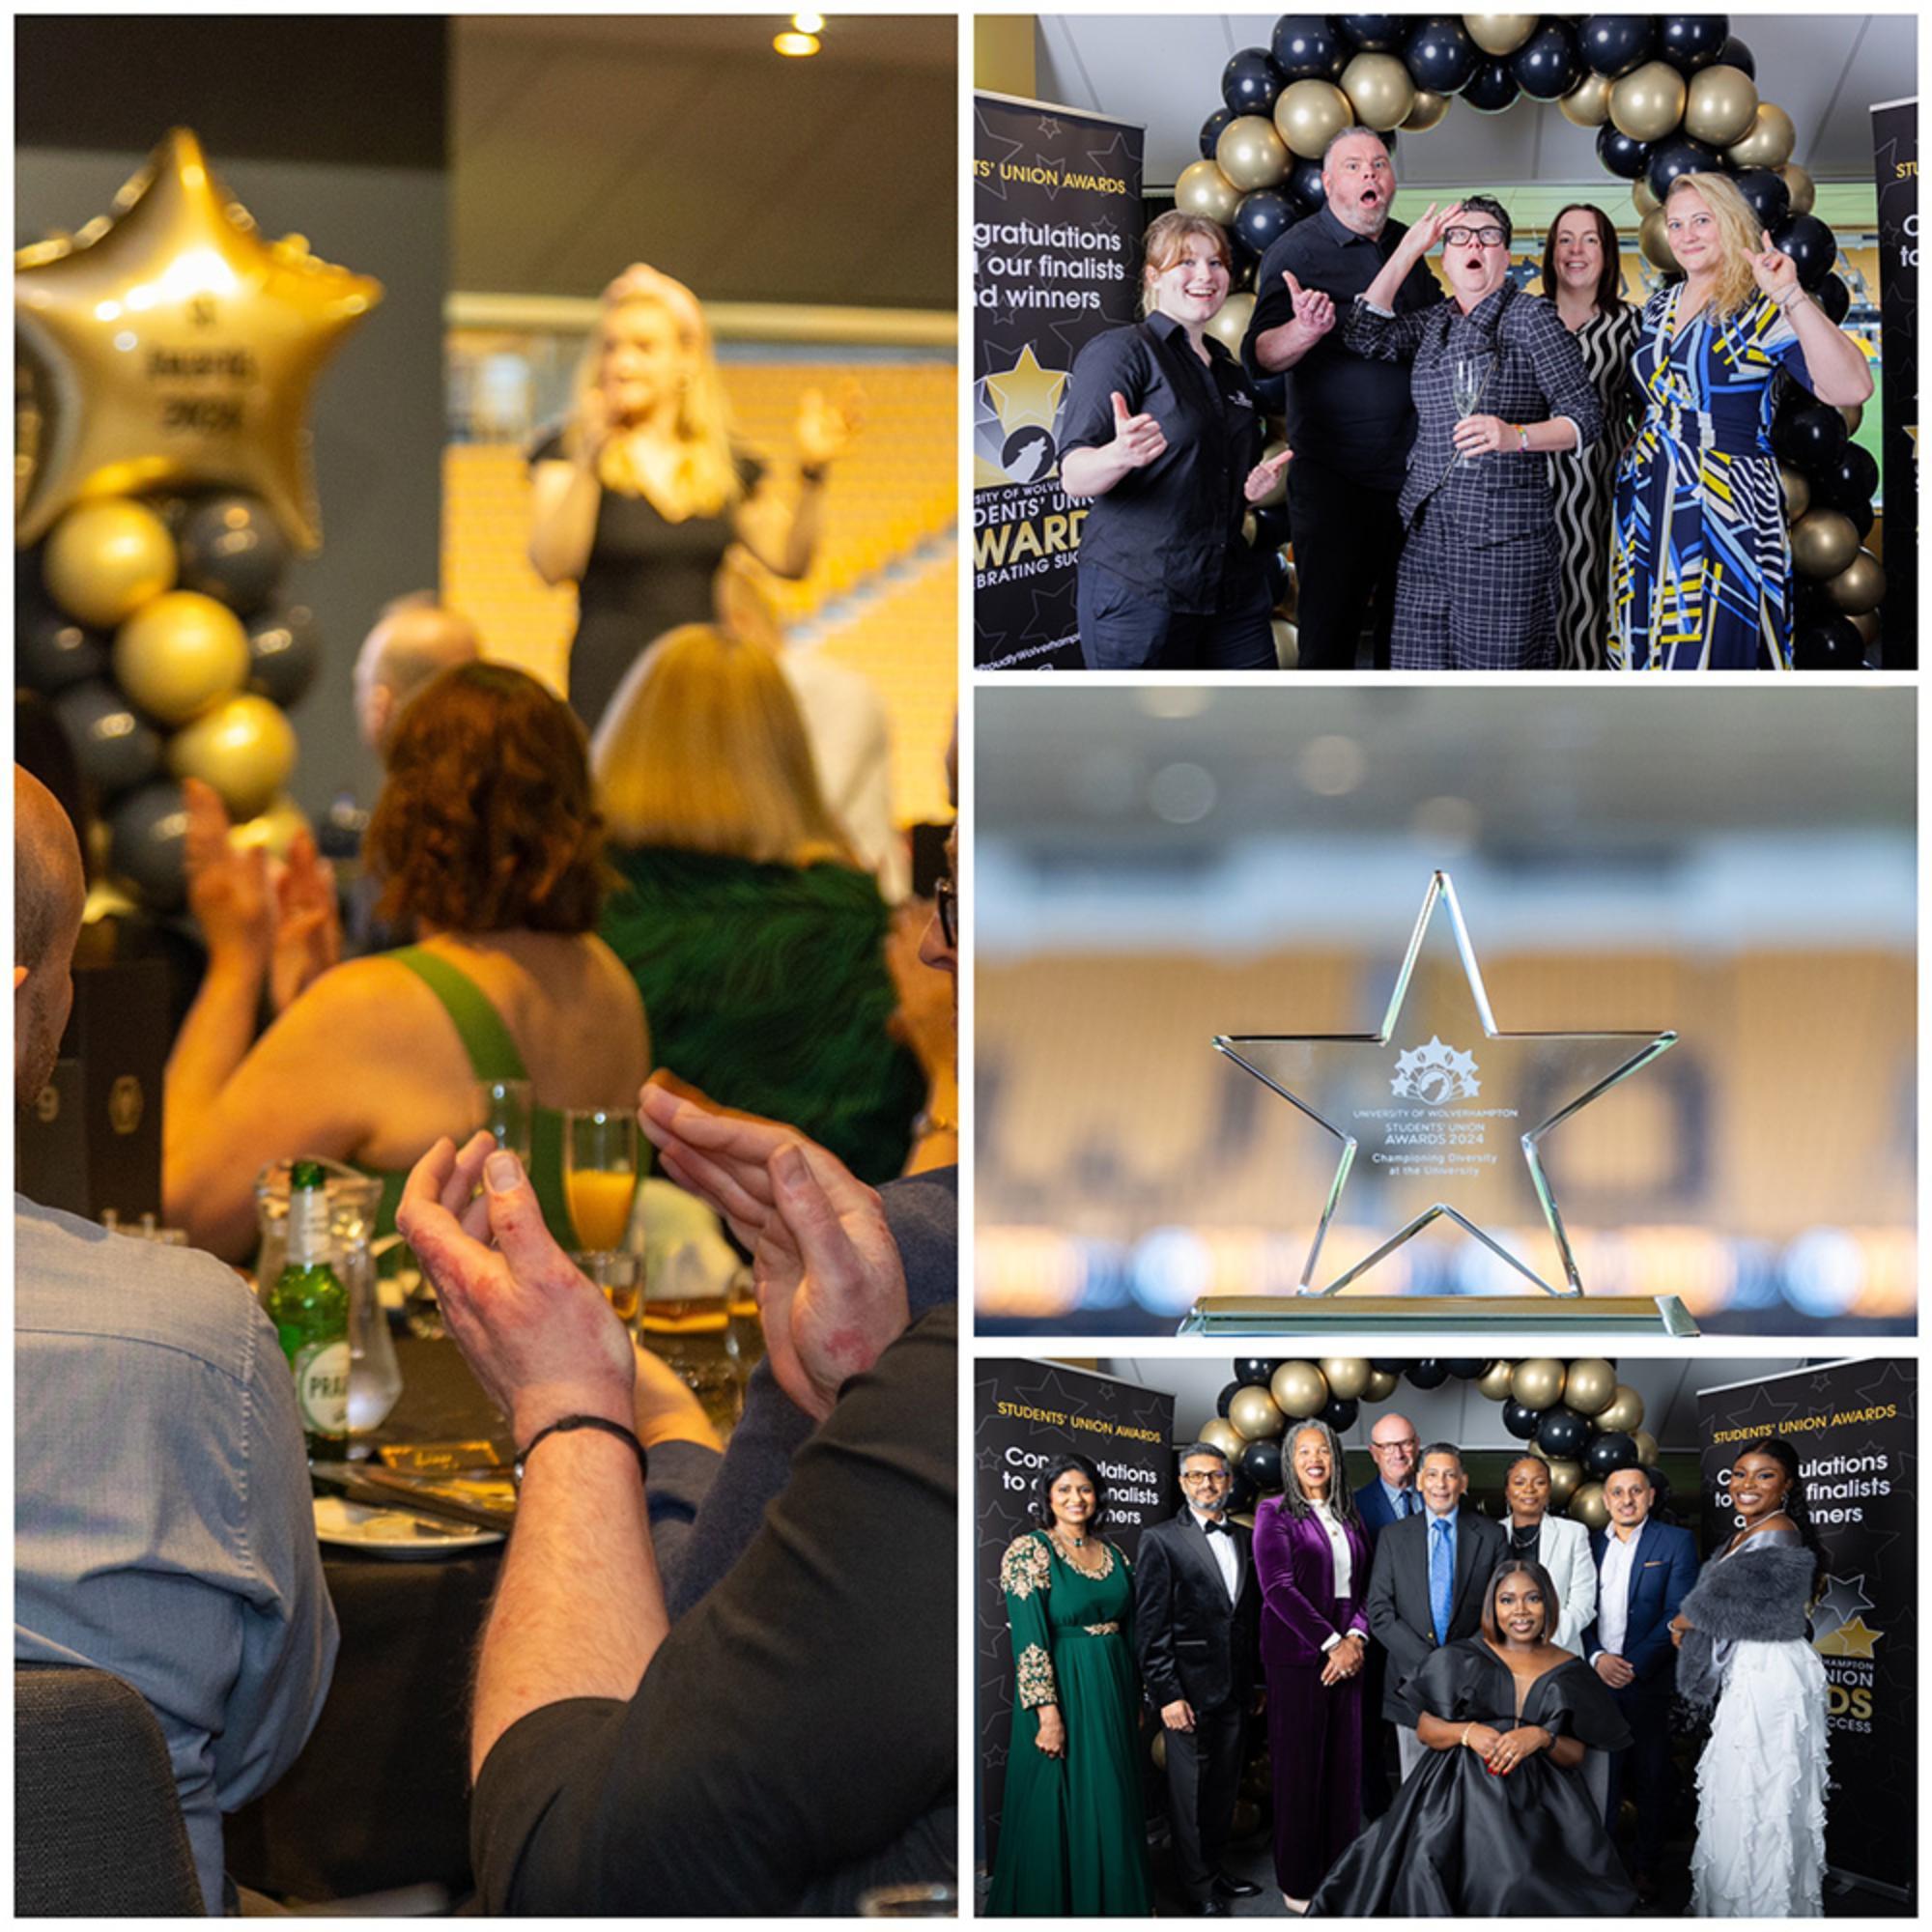 Four pictures of celebrations at the Students Union awards in a montage